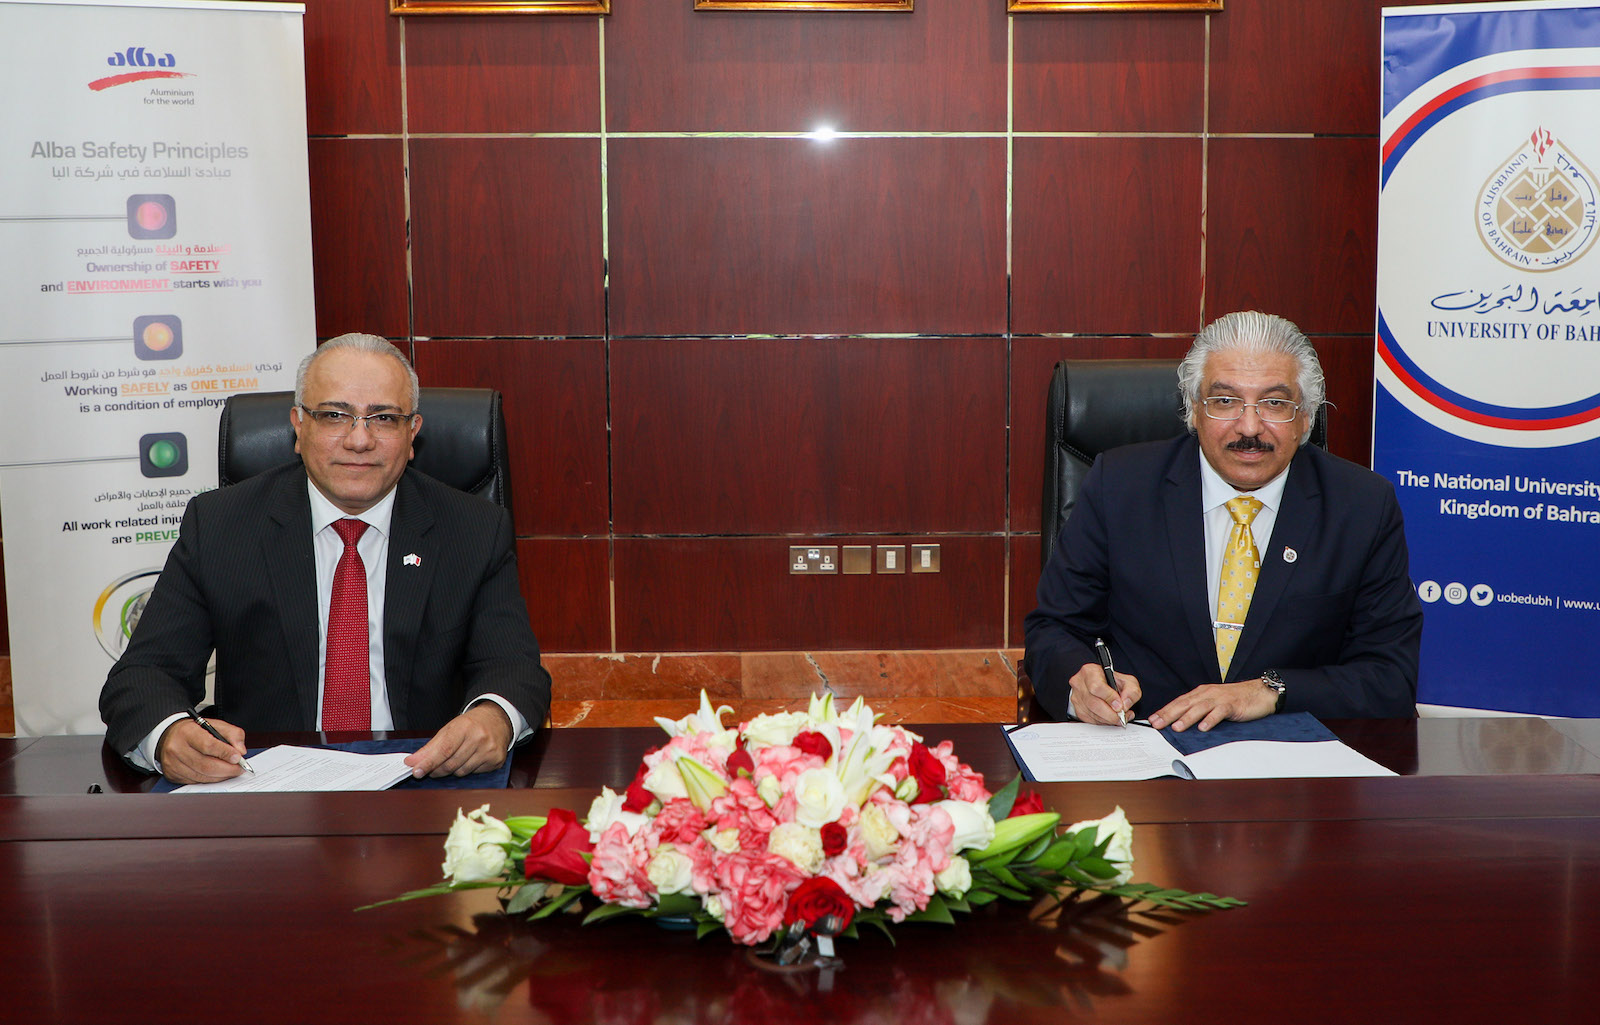 Ali Al Baqali, CEO of Alba (left), and Prof. Riyad Yousif Hamzah, president of the University of Bahrain (right), sign an MOU at the Alba premises. aluminum research